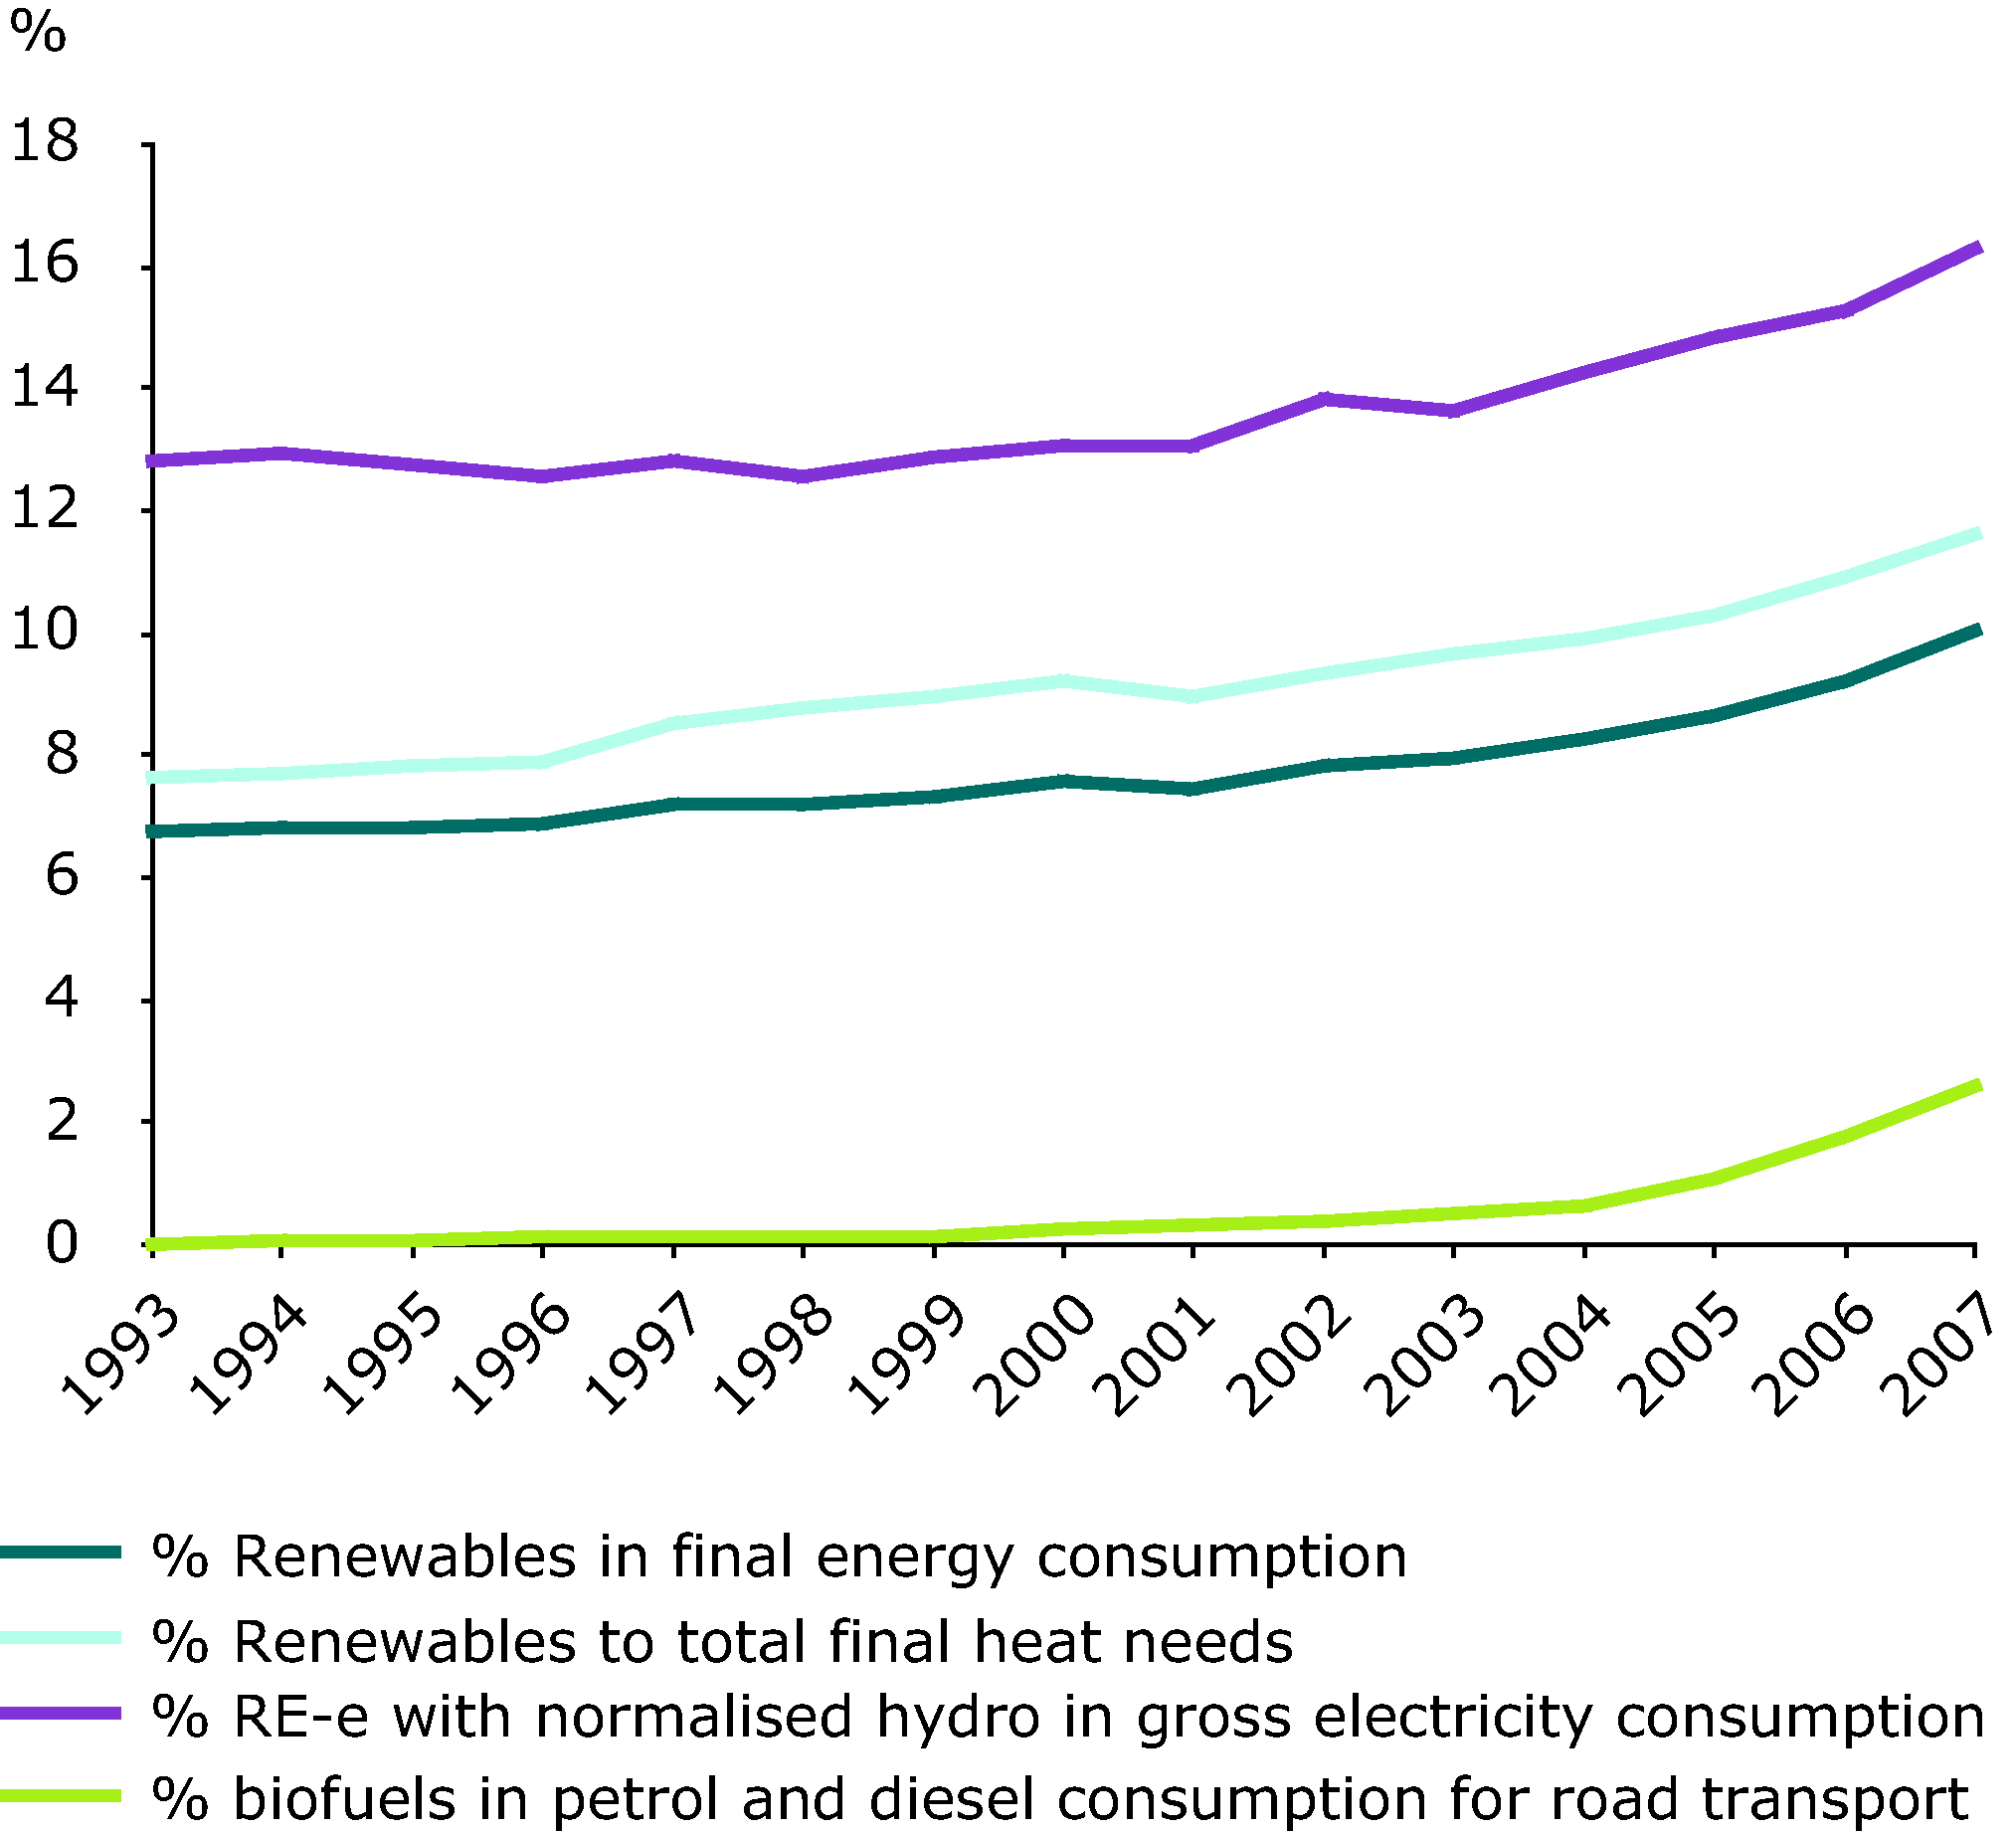 Share of renewable energy to final energy consumption, 1993-2007